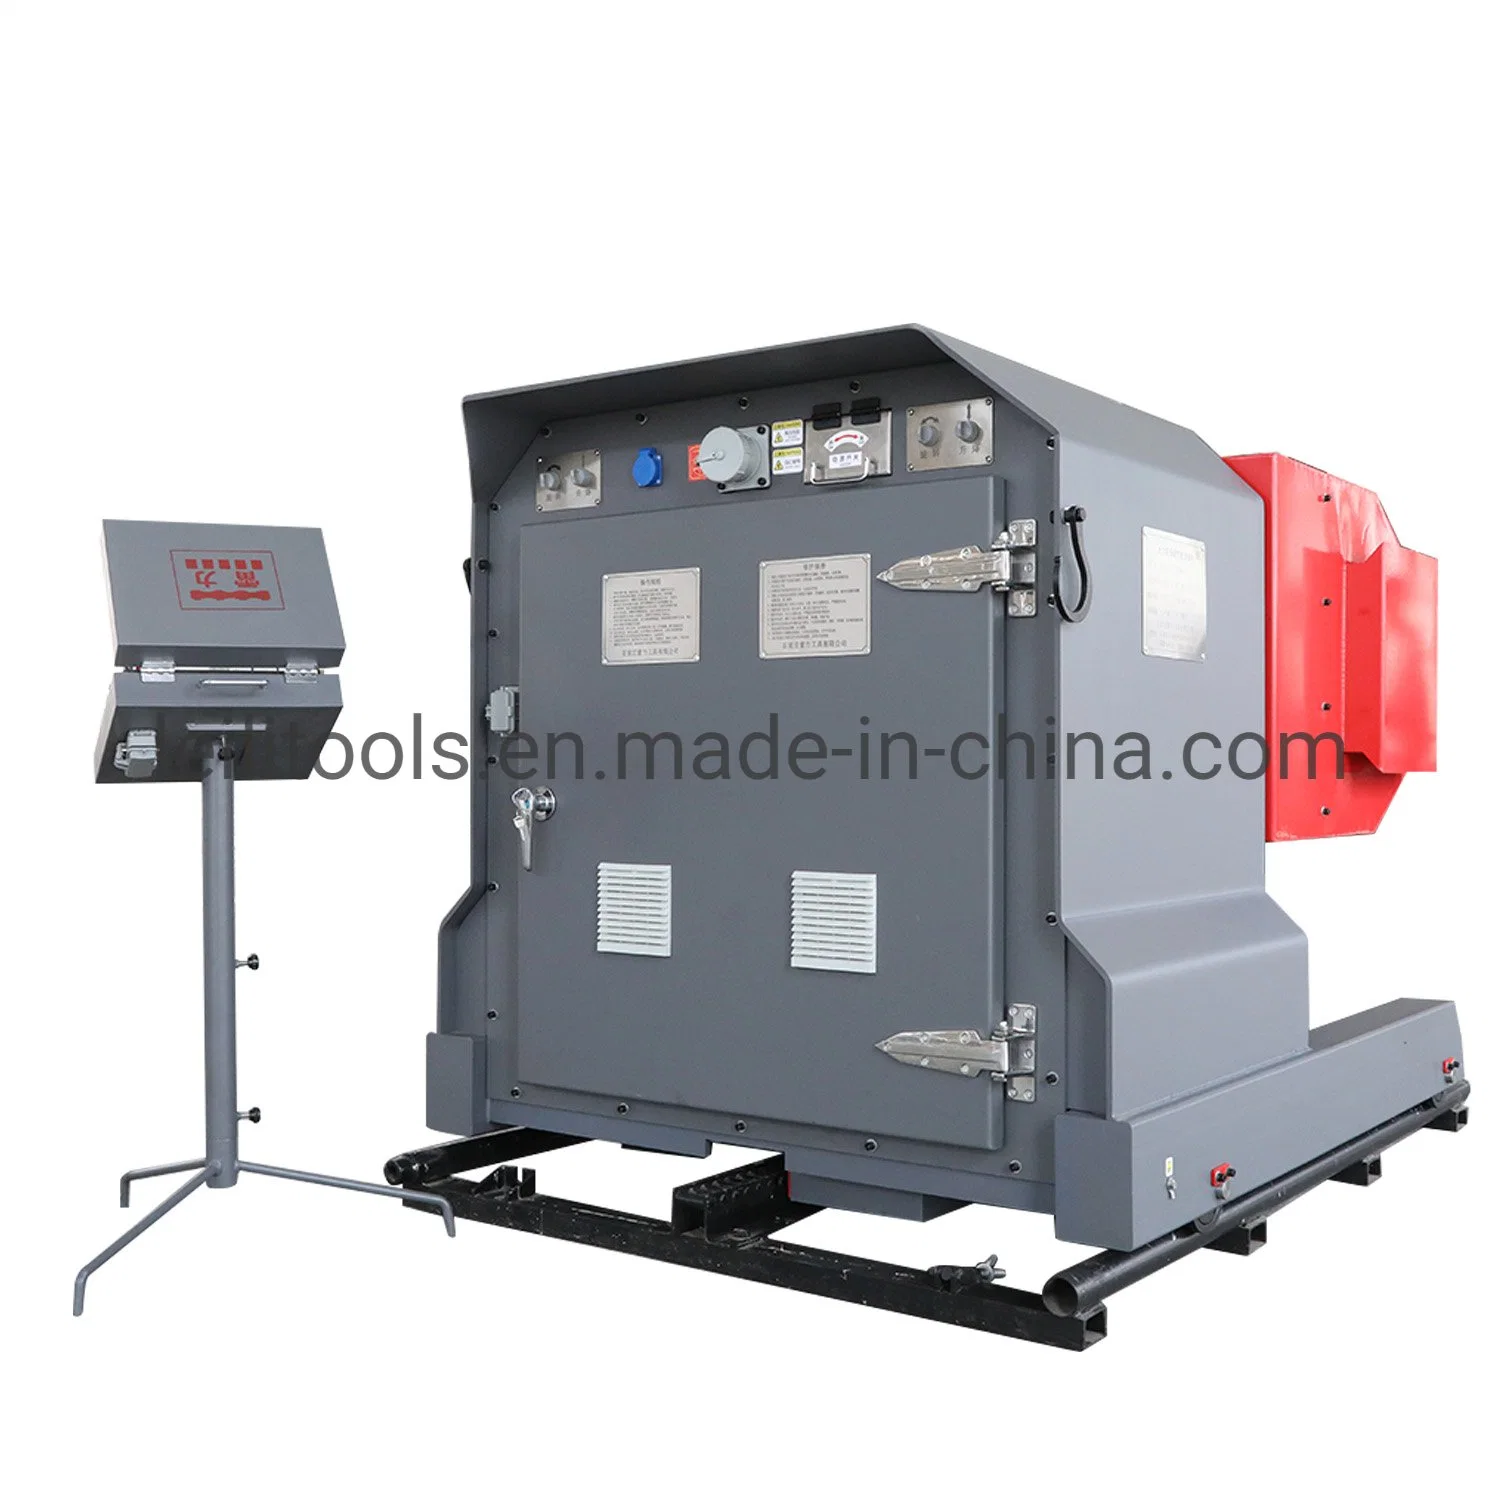 Diamond Wire Saw Cutting Machine for Granite Marble Quarry/ Stone Quarry/Quarrying Cutting/Trimming Rock/Diamond Wire/Saw Machine/Best Big Cutter/